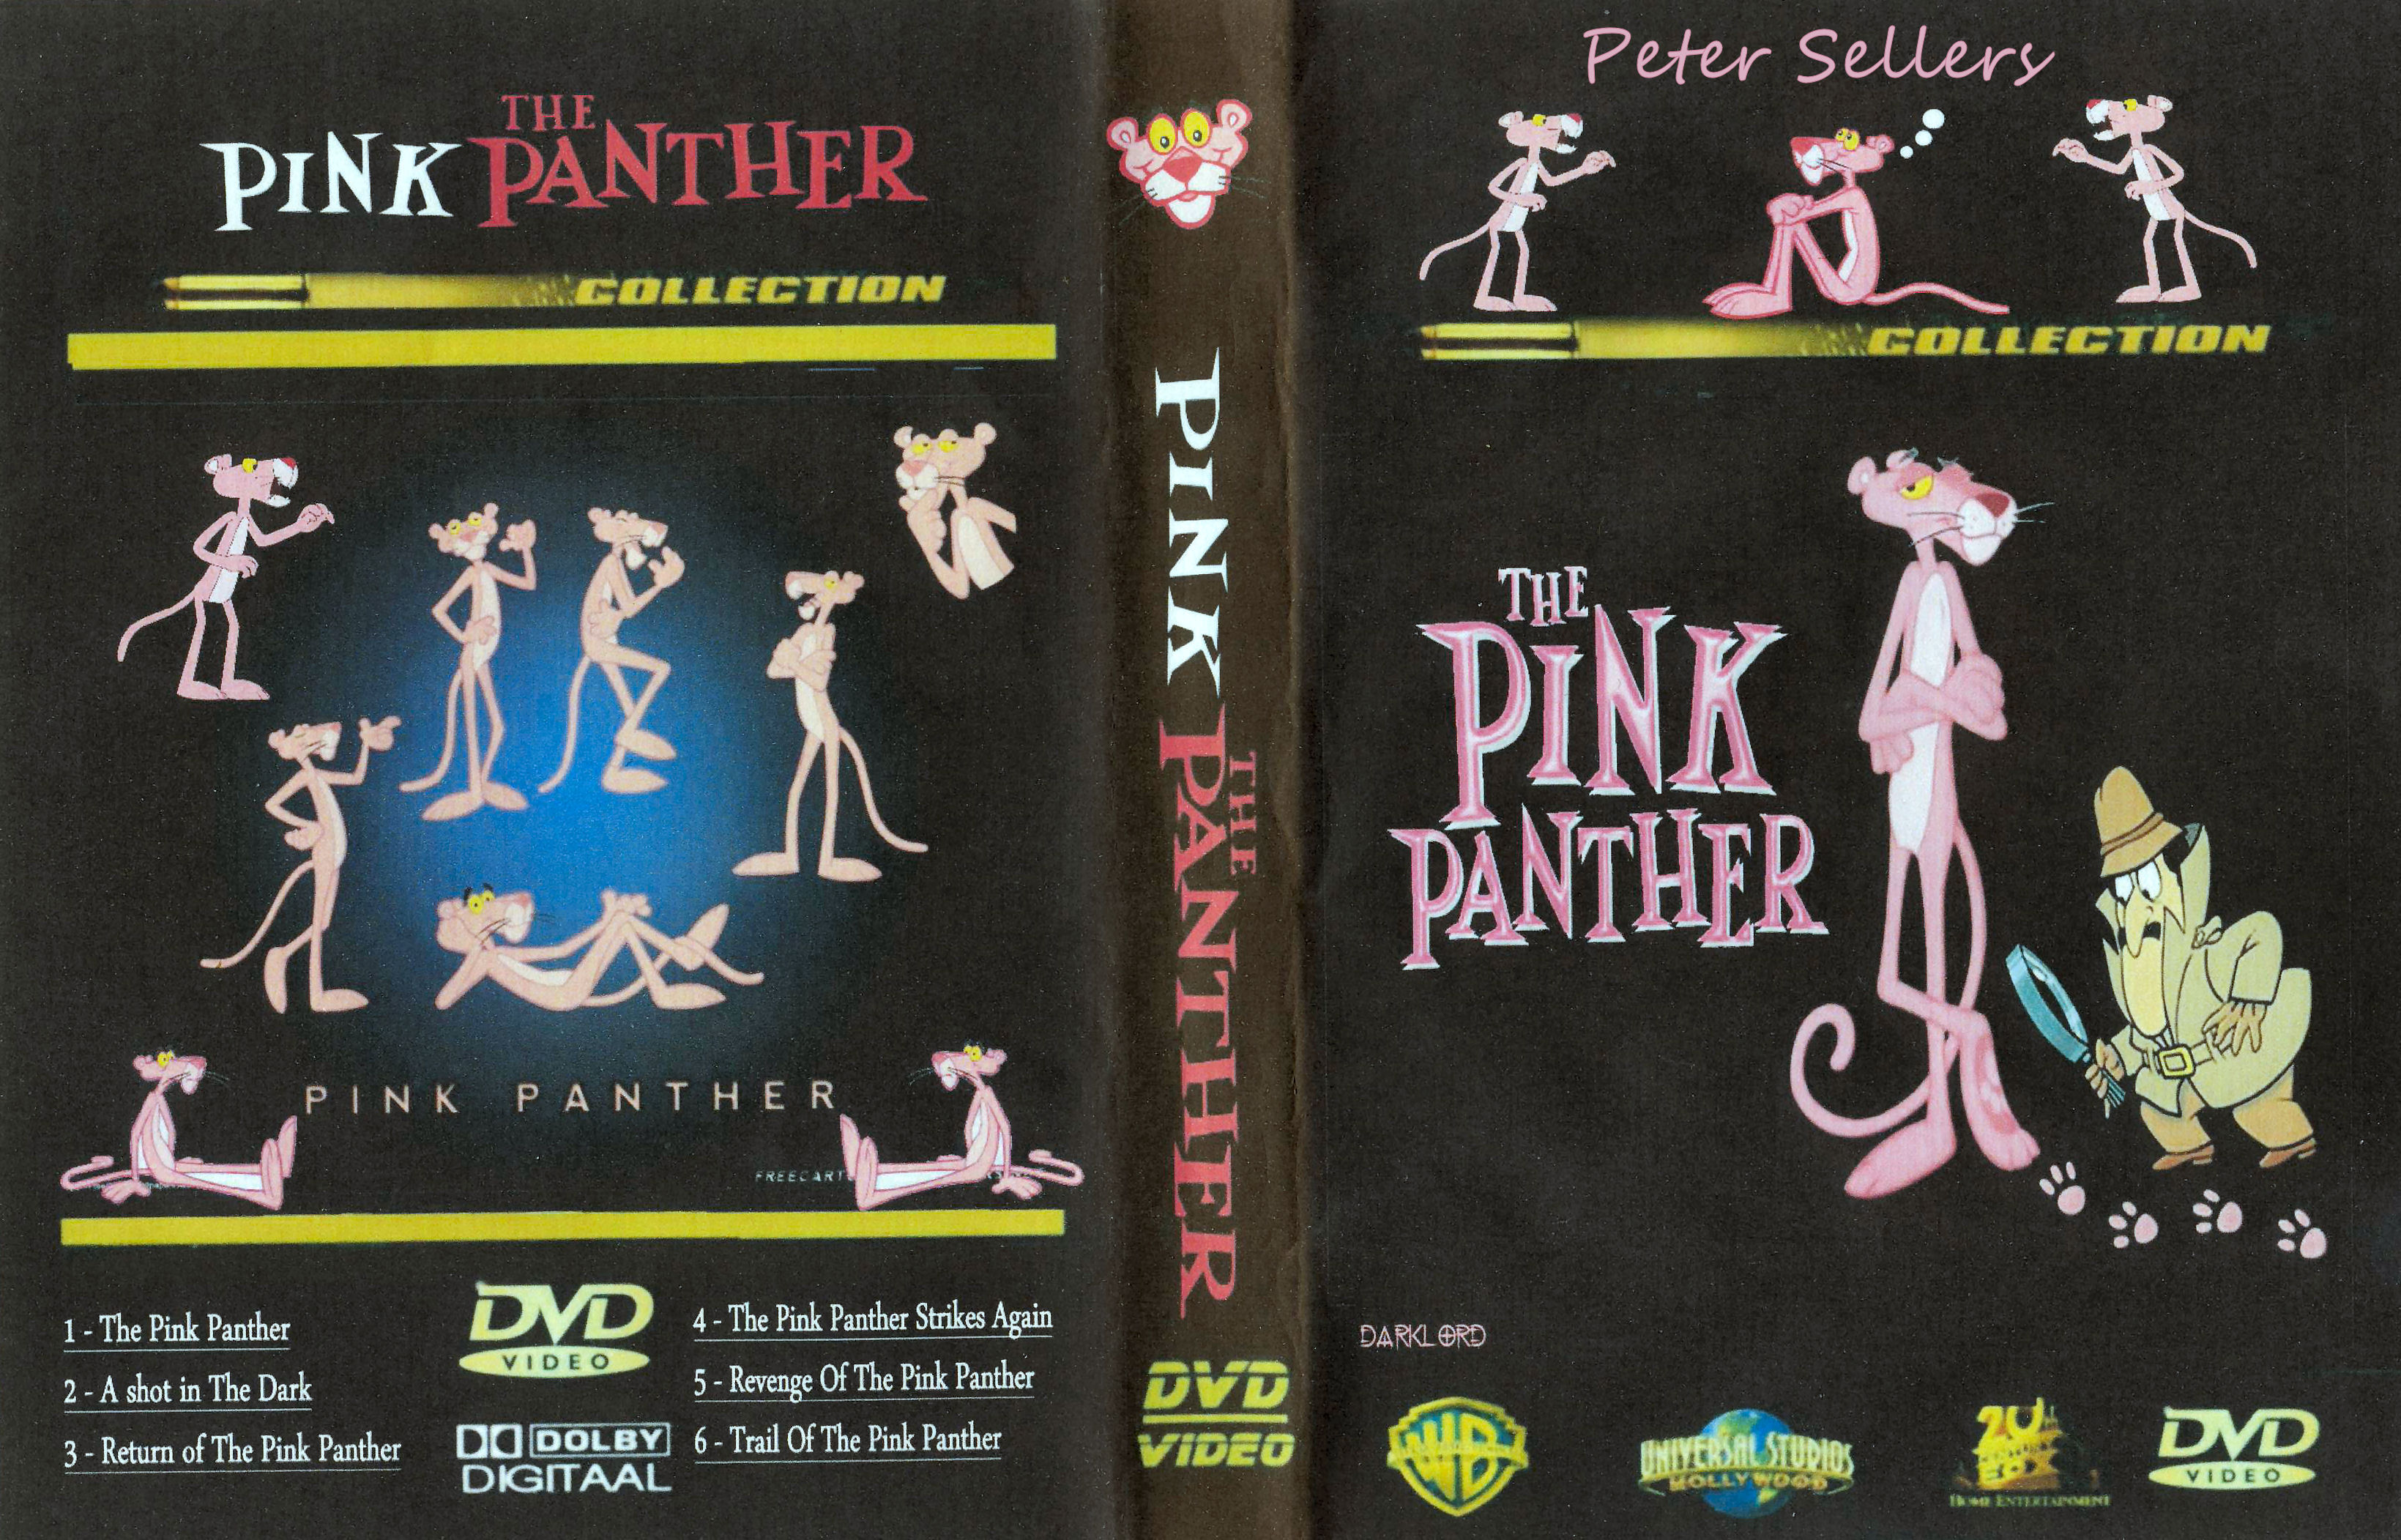 3 - The Return of the Pink Panther (1975)